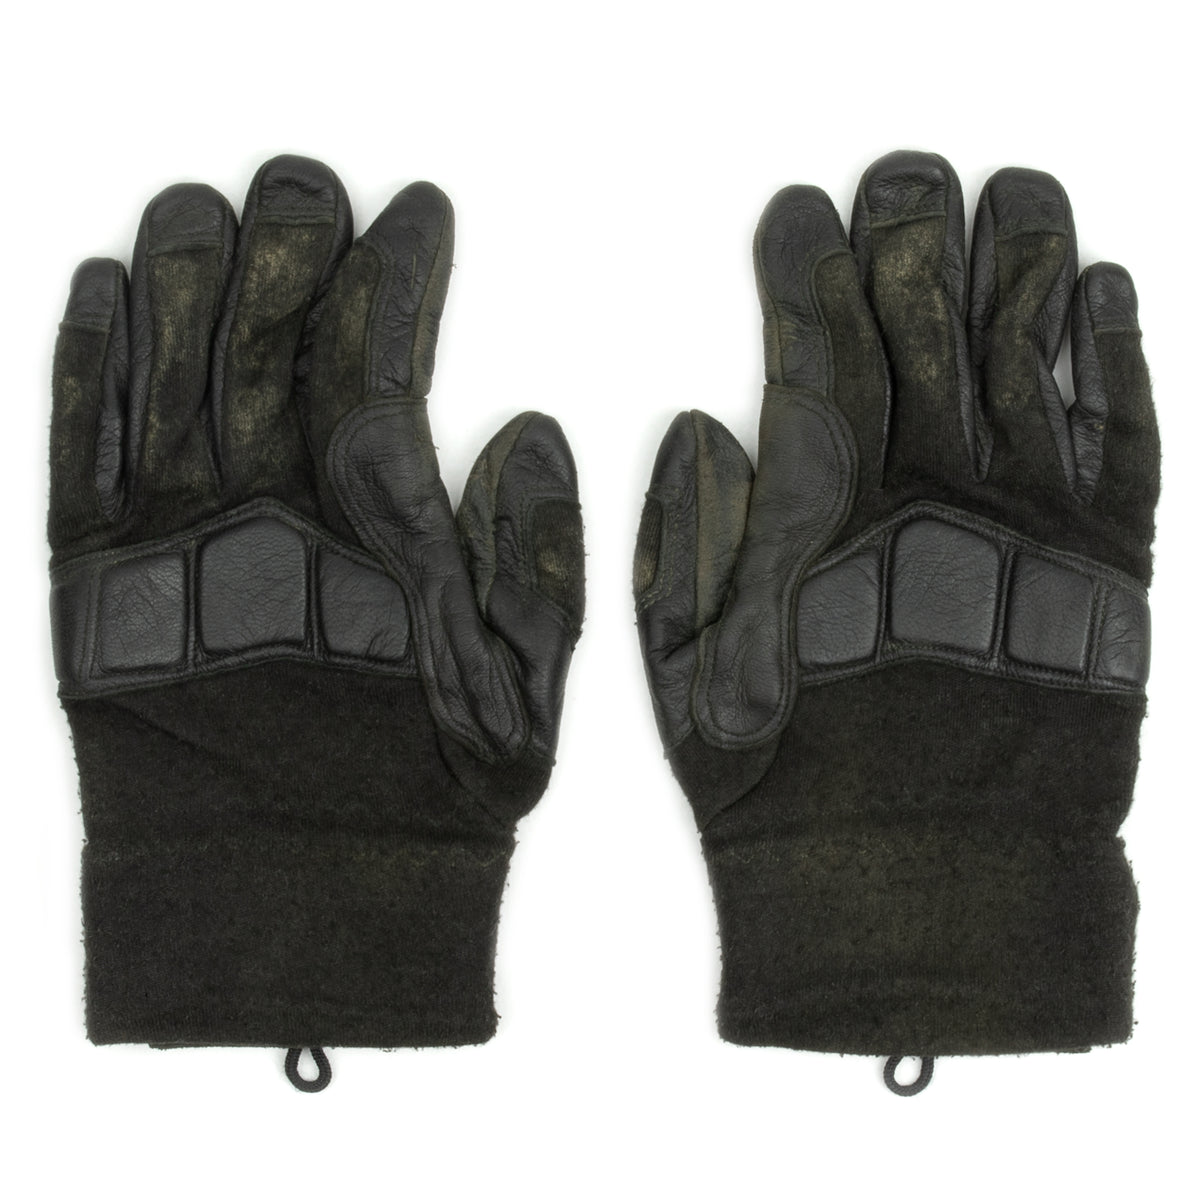 Black Austrian Leather Tactical Gloves | Padded Knuckles